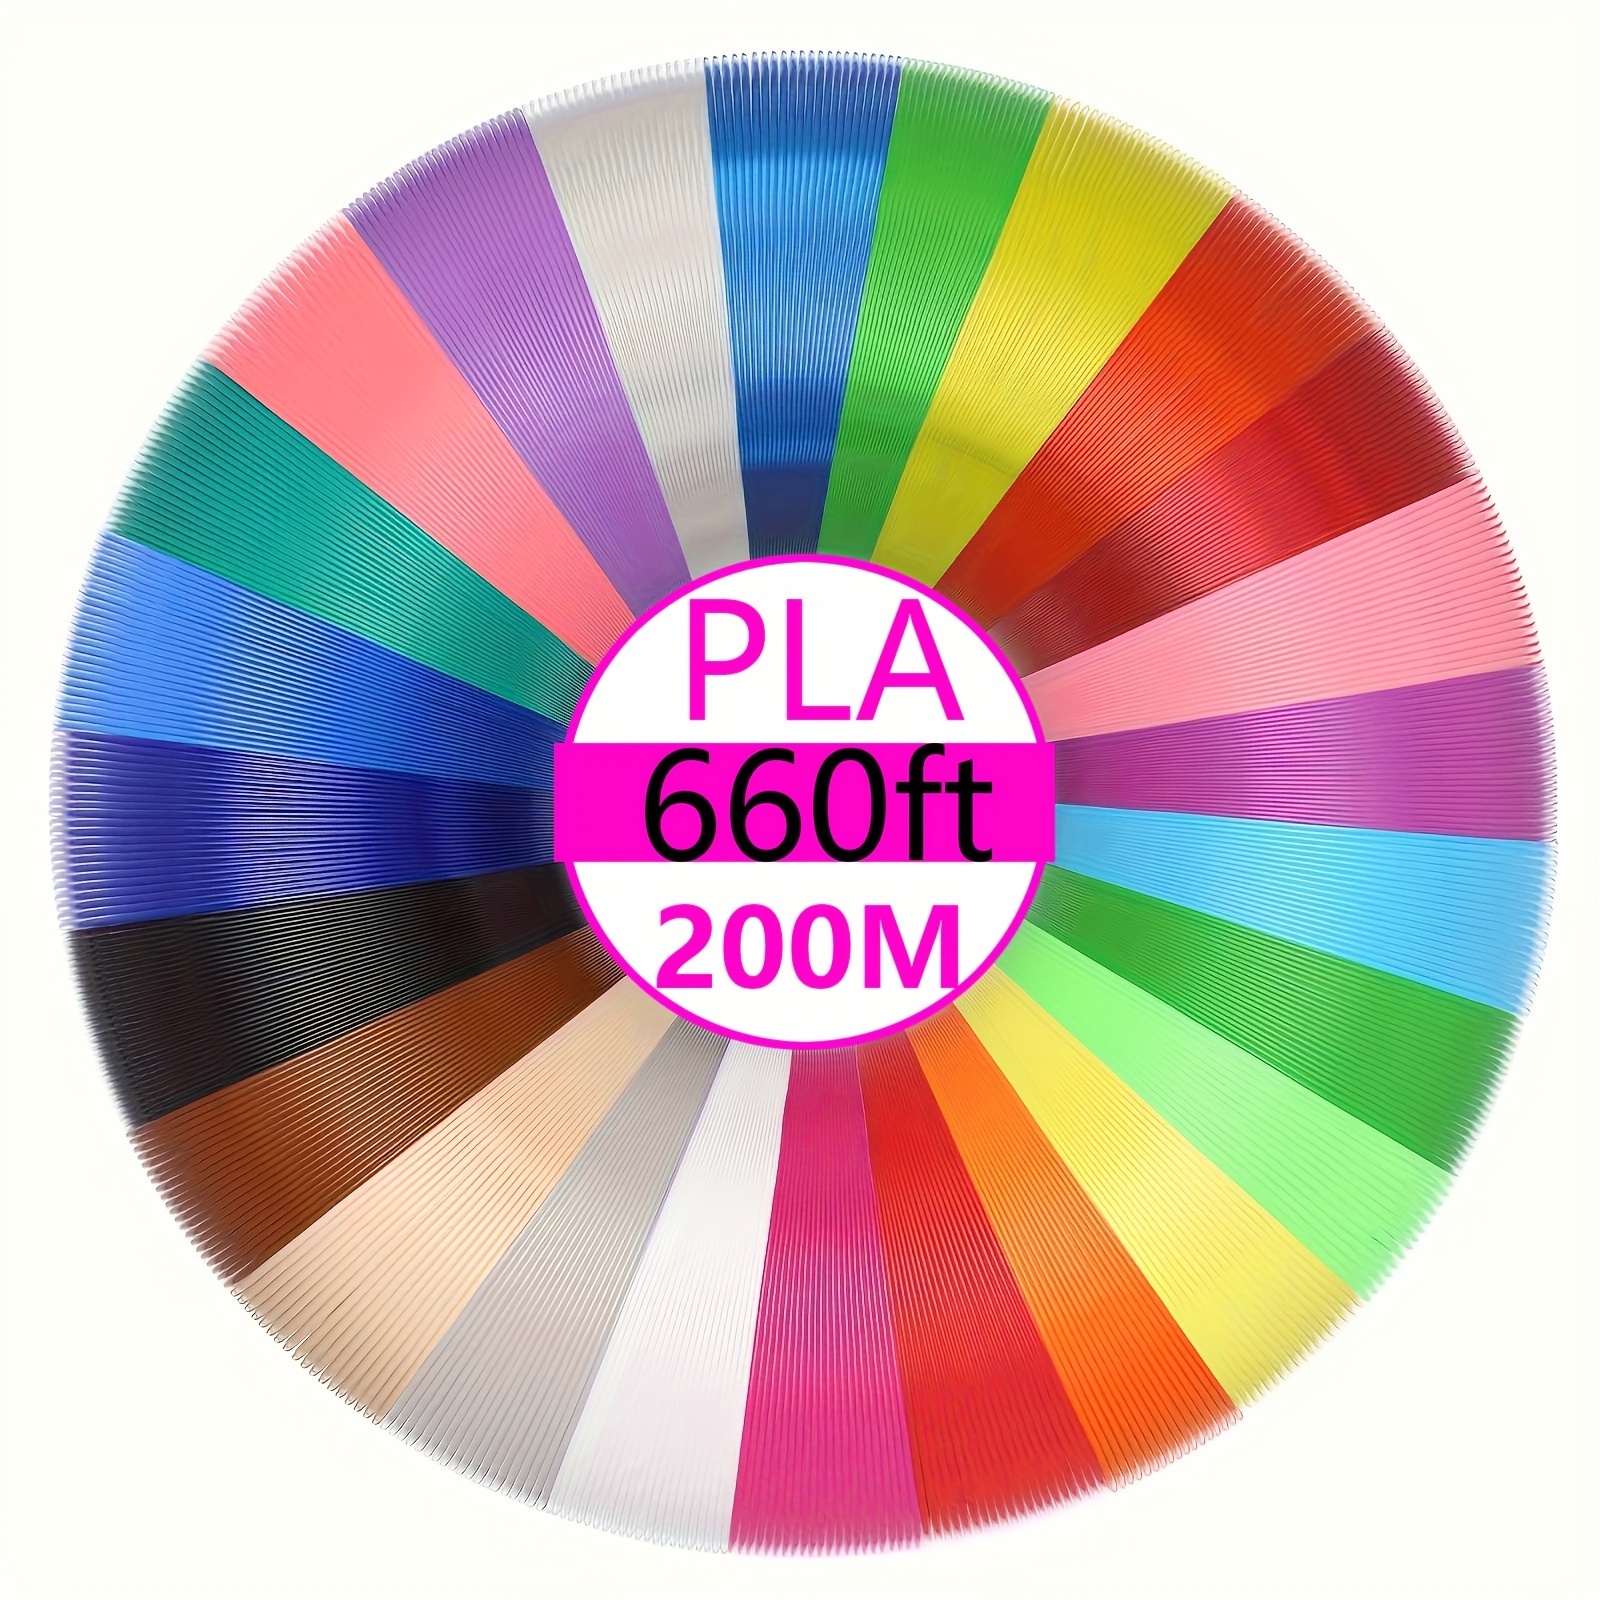 

40 Colors Pla Supplies Consumables For 3d Printing Pen, Great Birthday/christmas Gift, 1.75mm Pla Filament